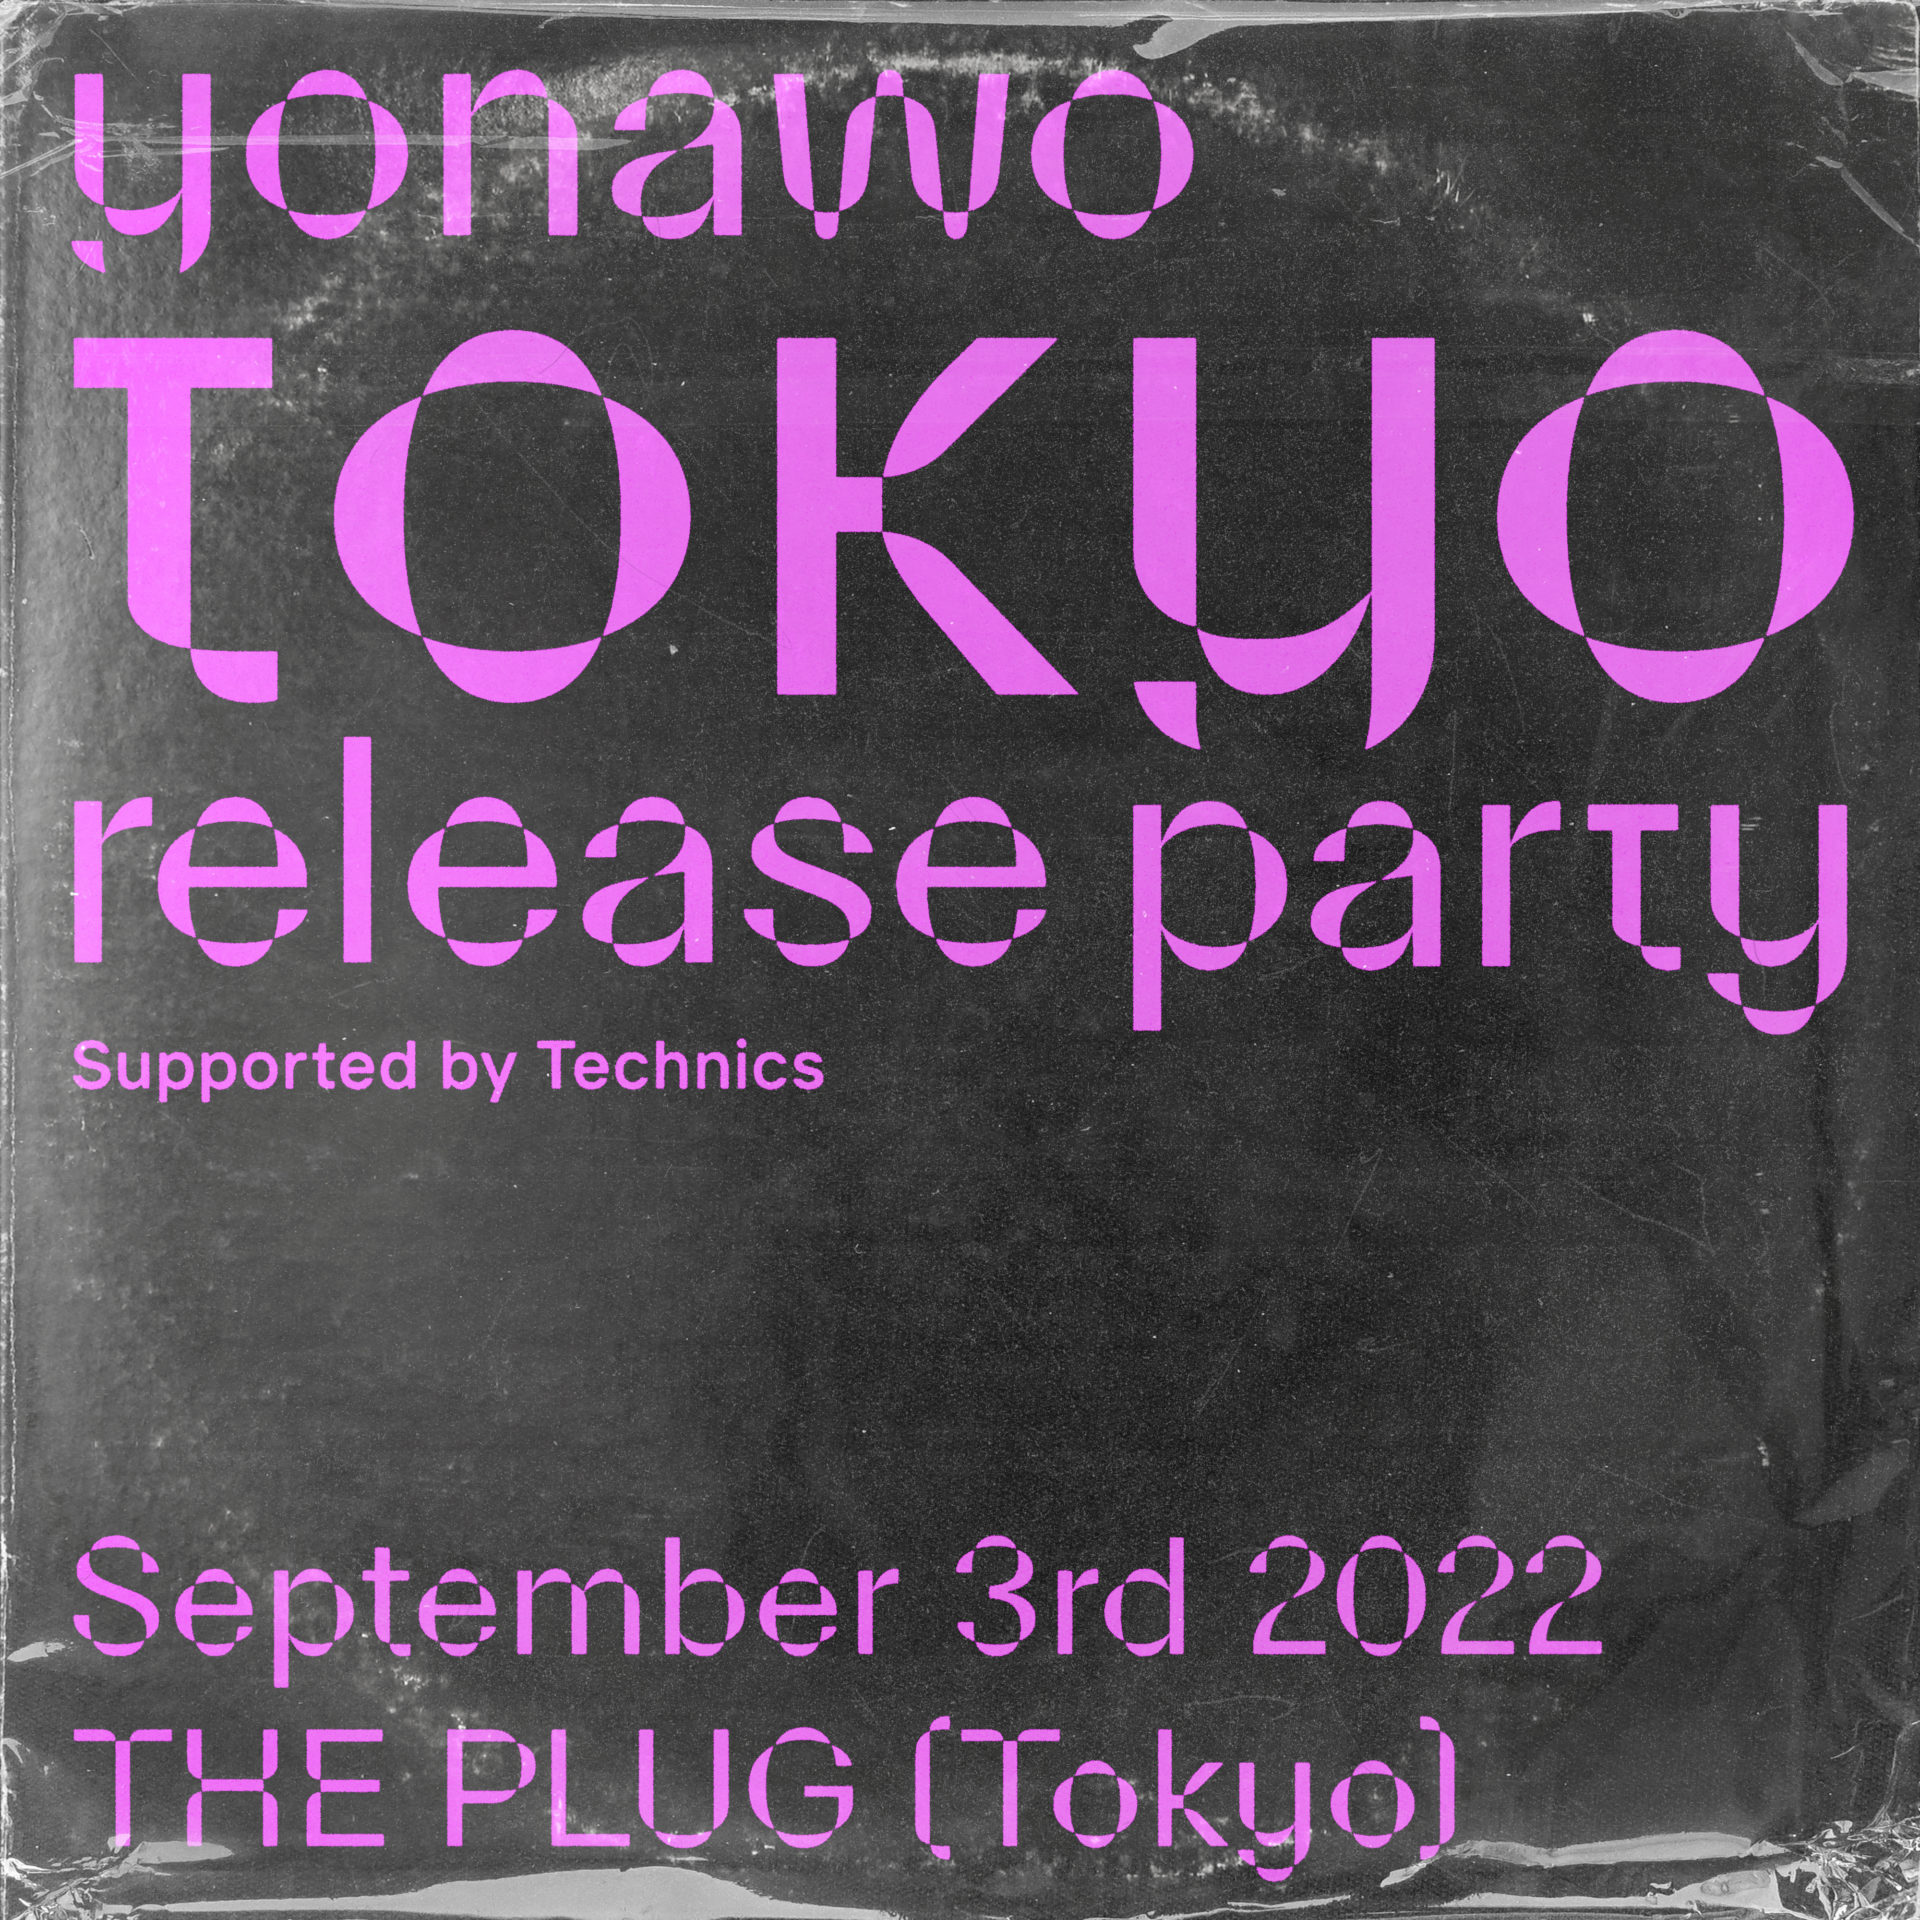 tokyo release party supported by Technics」詳細発表！ | yonawo